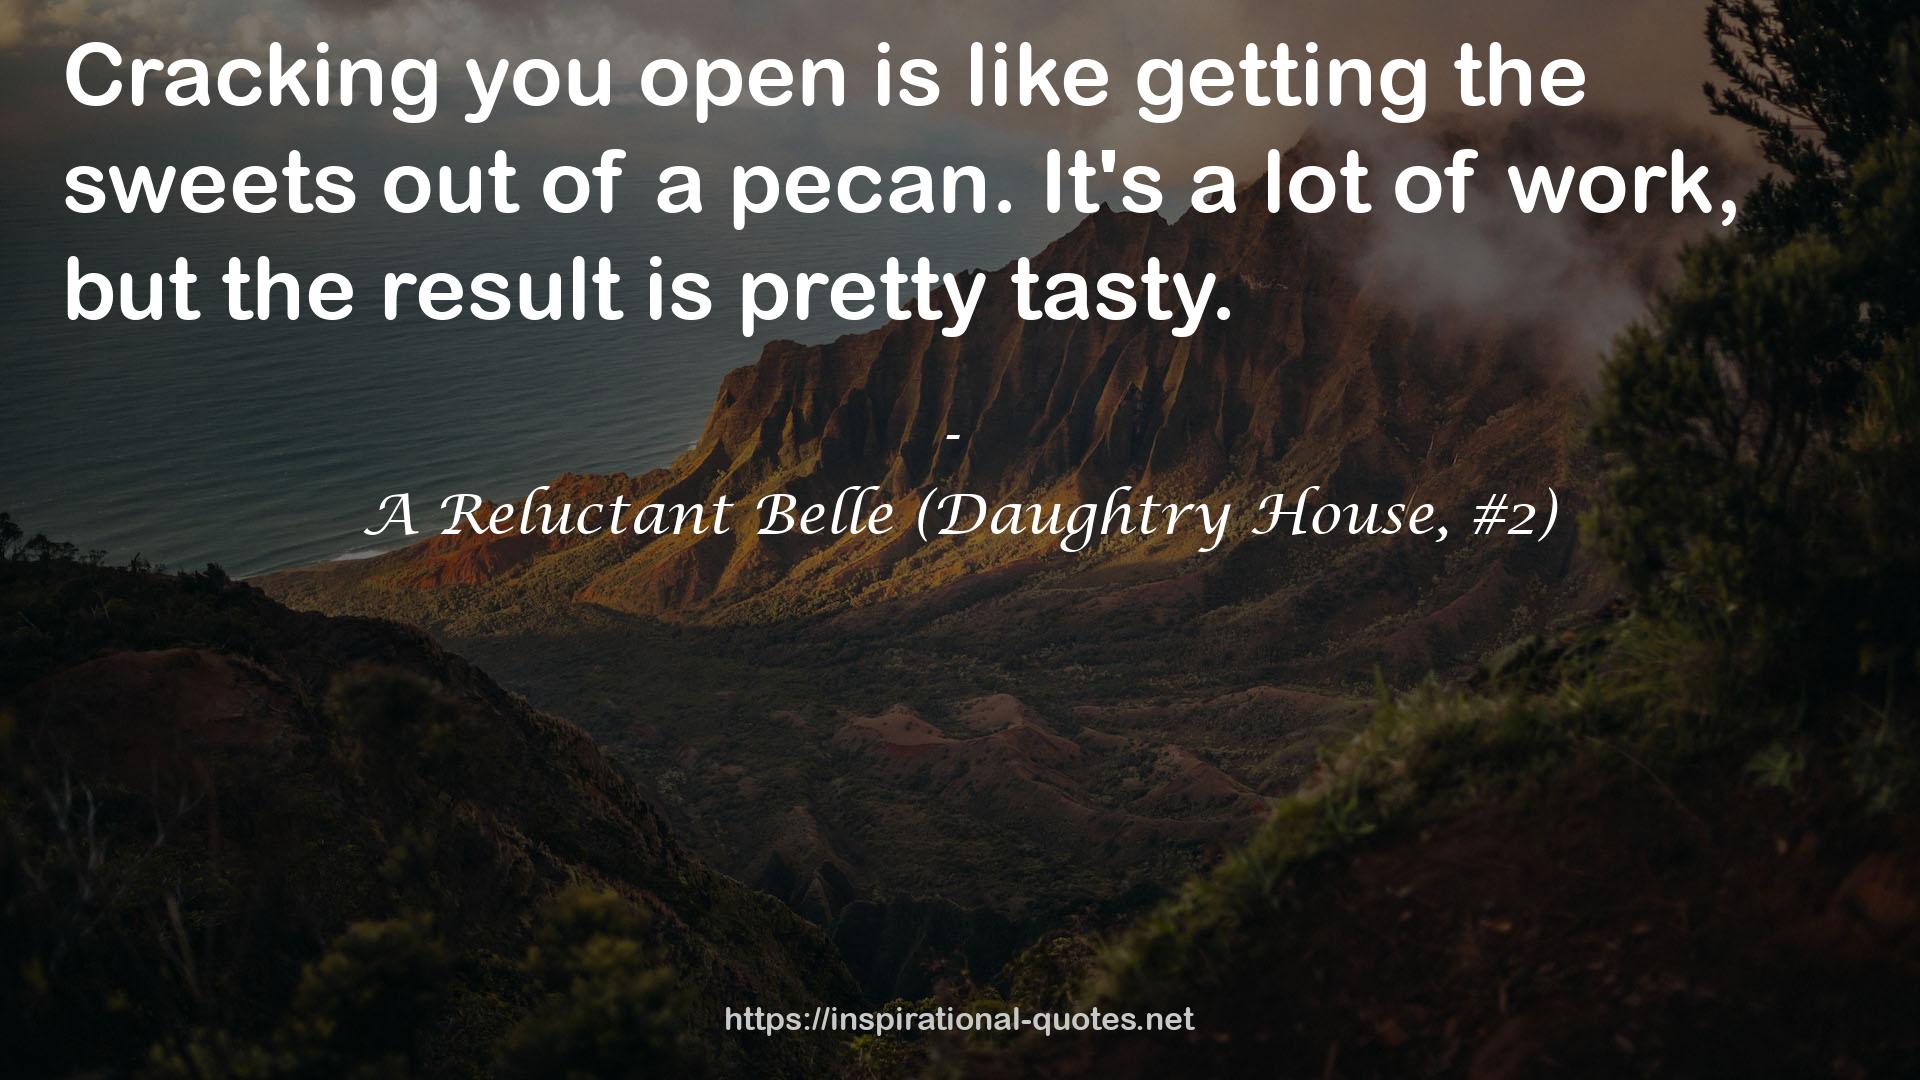 A Reluctant Belle (Daughtry House, #2) QUOTES